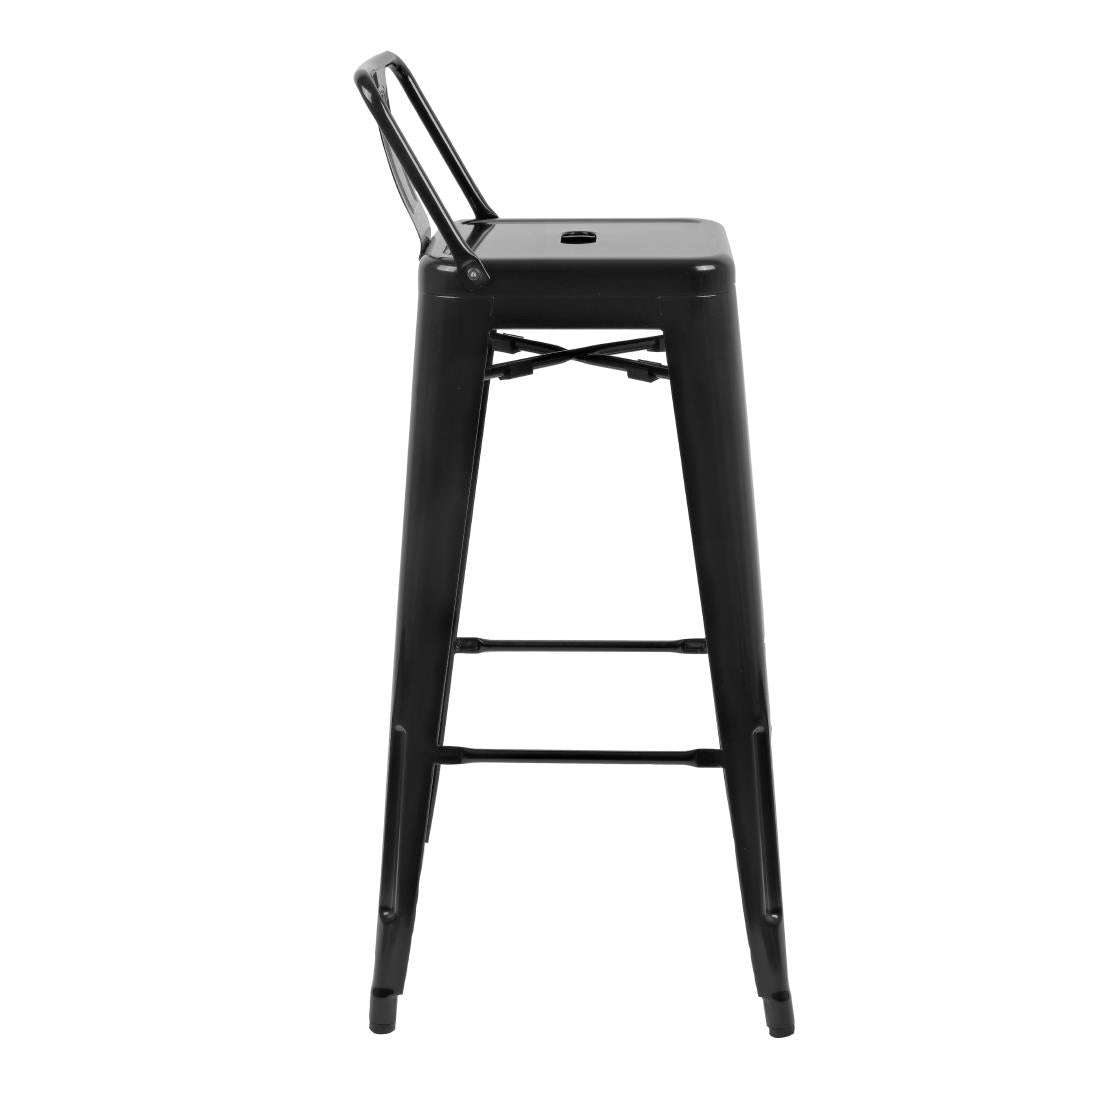 Bolero Bistro Steel High Stool With Backrest (Pack of 4) JD Catering Equipment Solutions Ltd